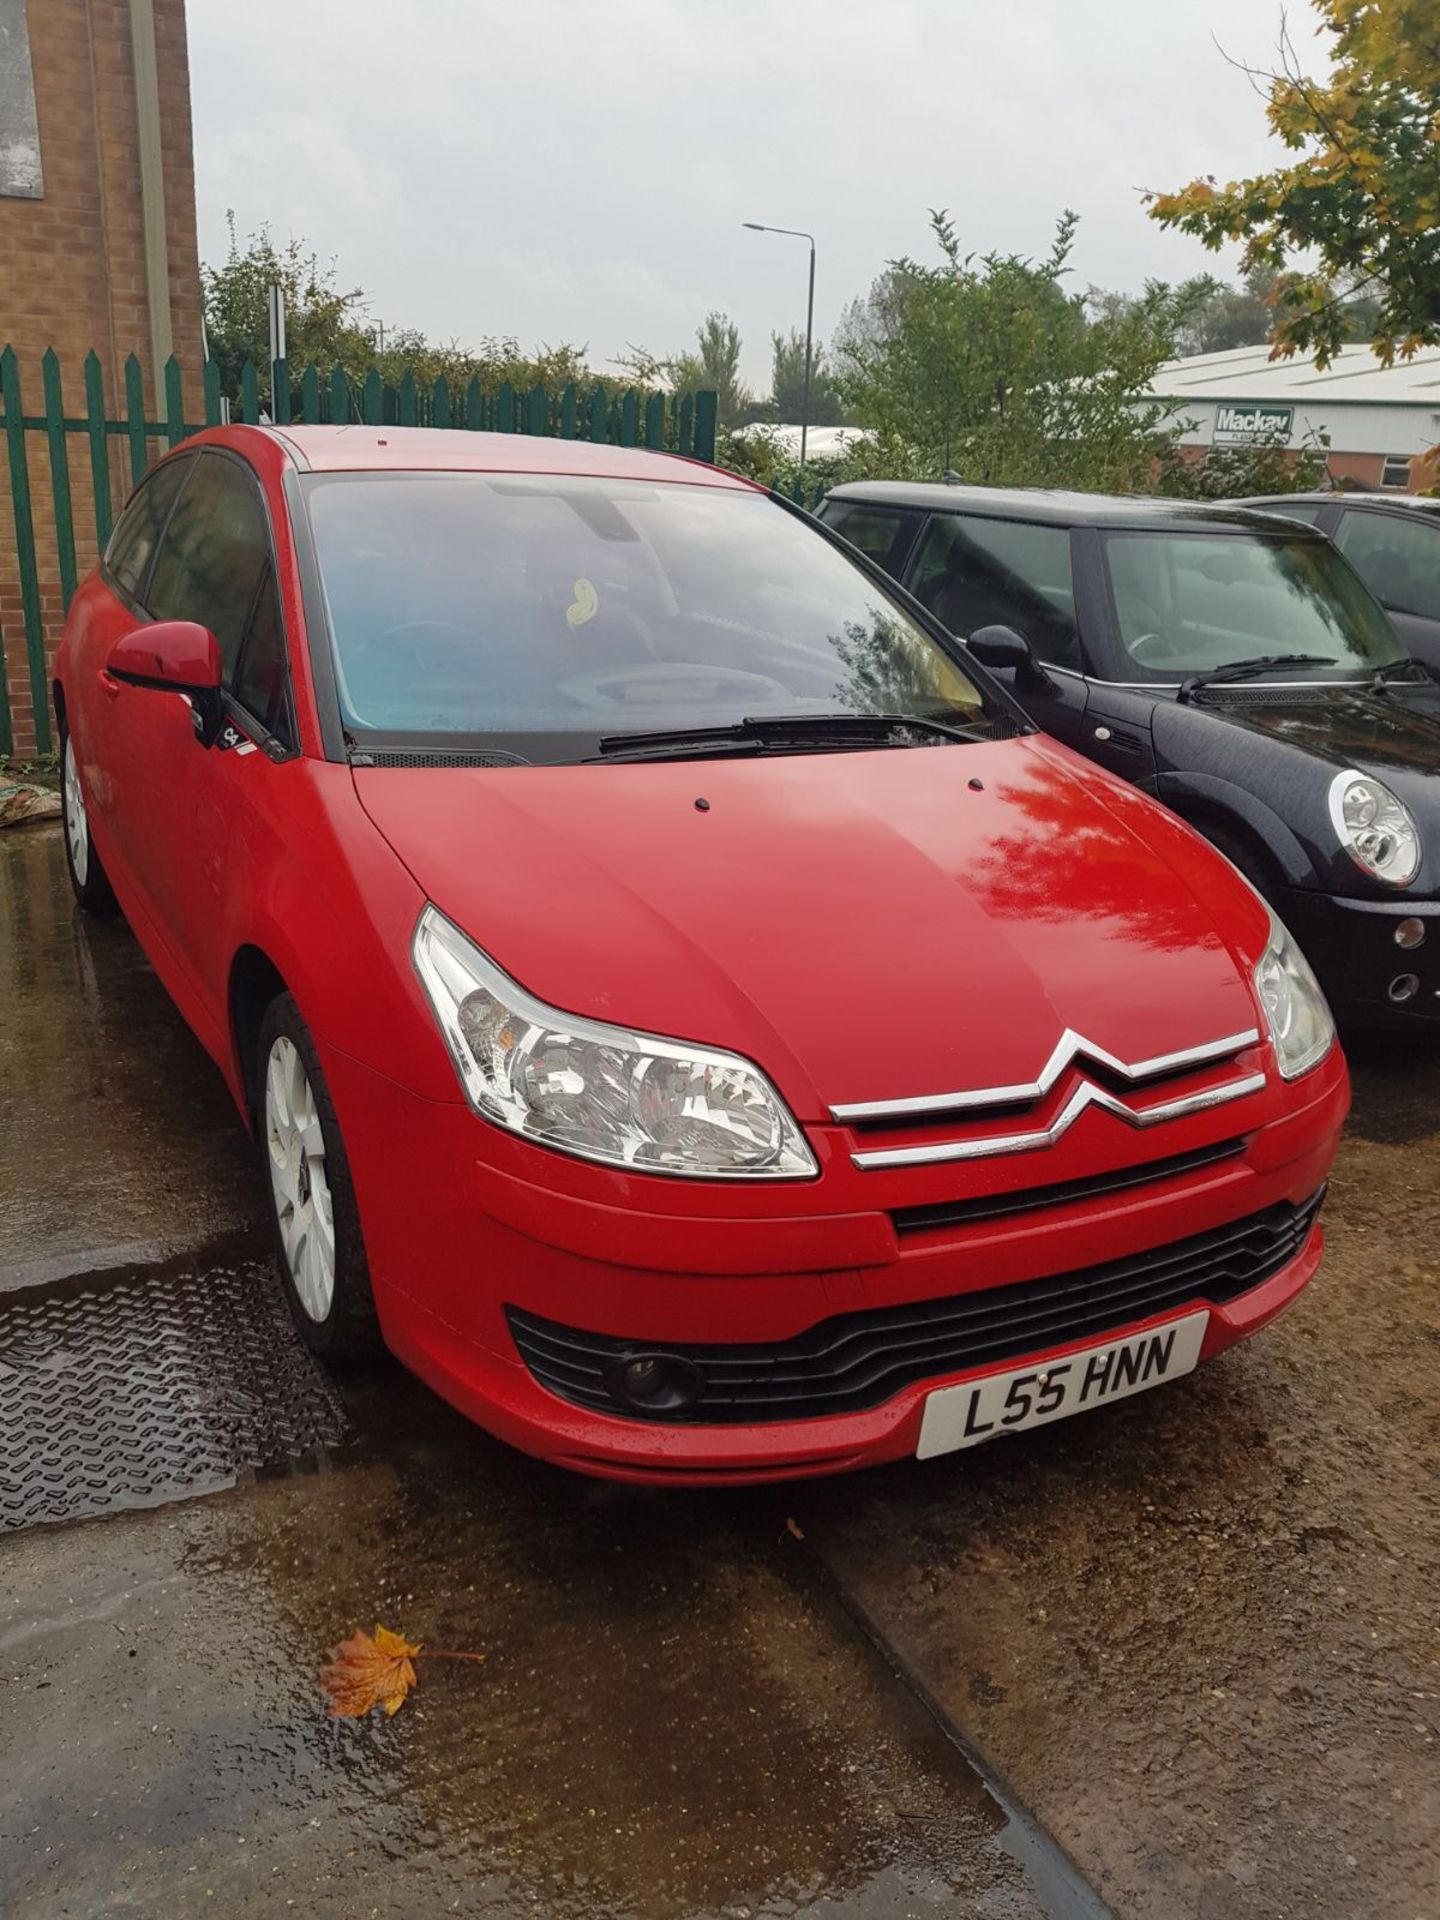 RARE 2008 CITROEN C4 LOEB HDI 110, NUMBER 231, SHOWING 3 FORMER KEEPERS *NO VAT* - Image 2 of 19